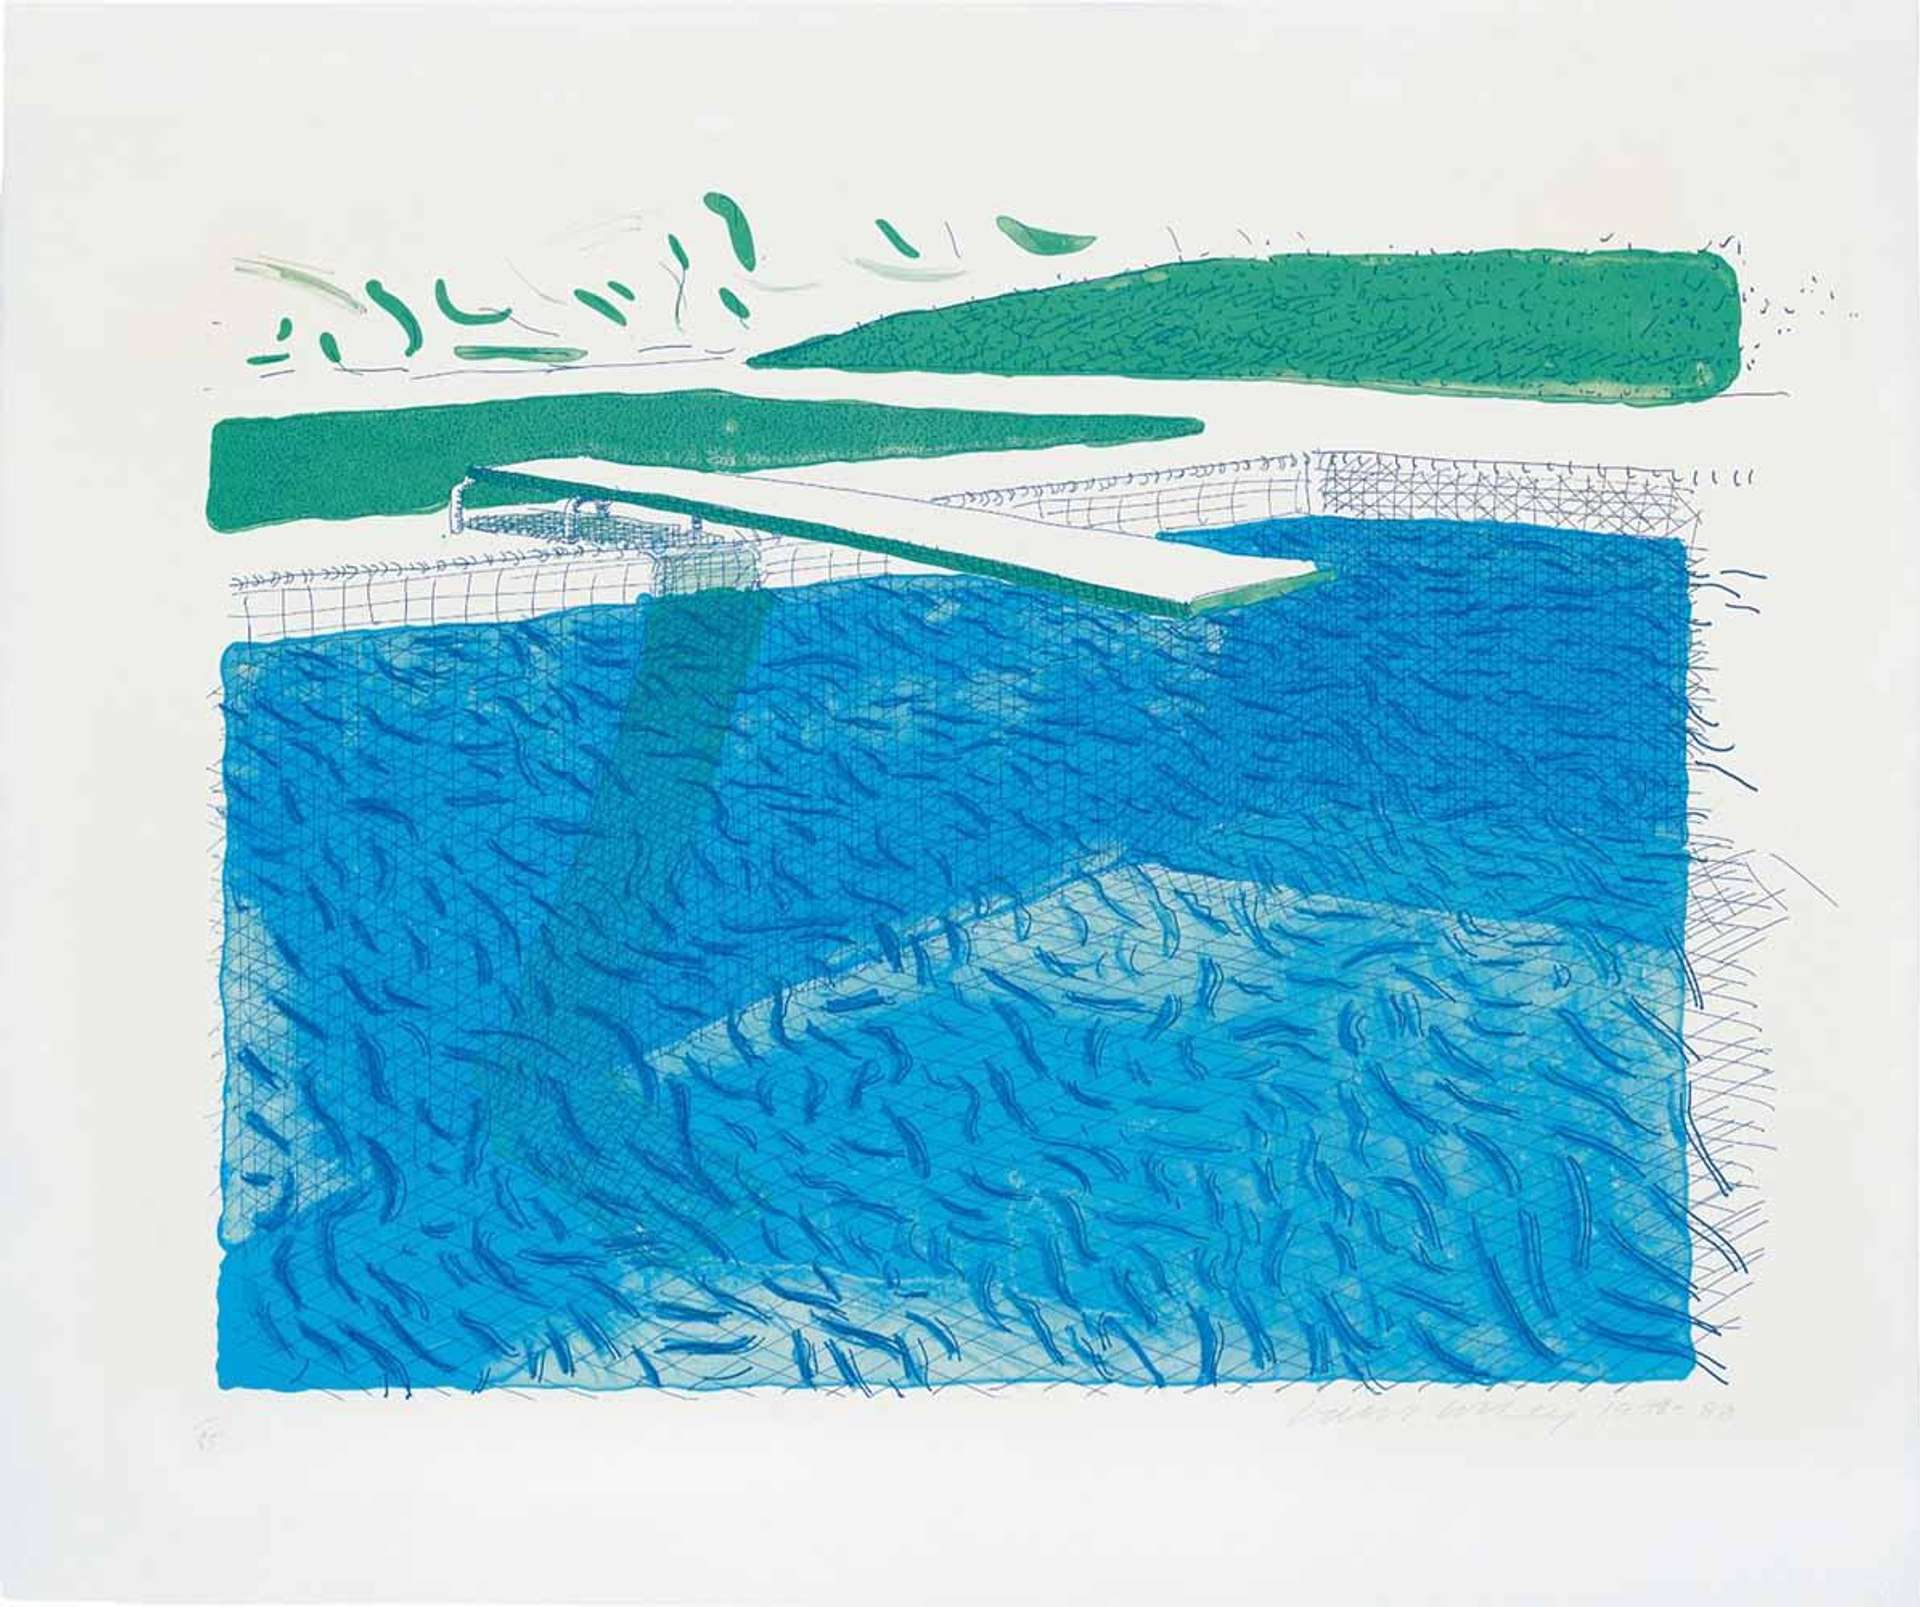 A colourful lithograph by David Hockney depicting a blue swimming pool and diving board against a white paper background.